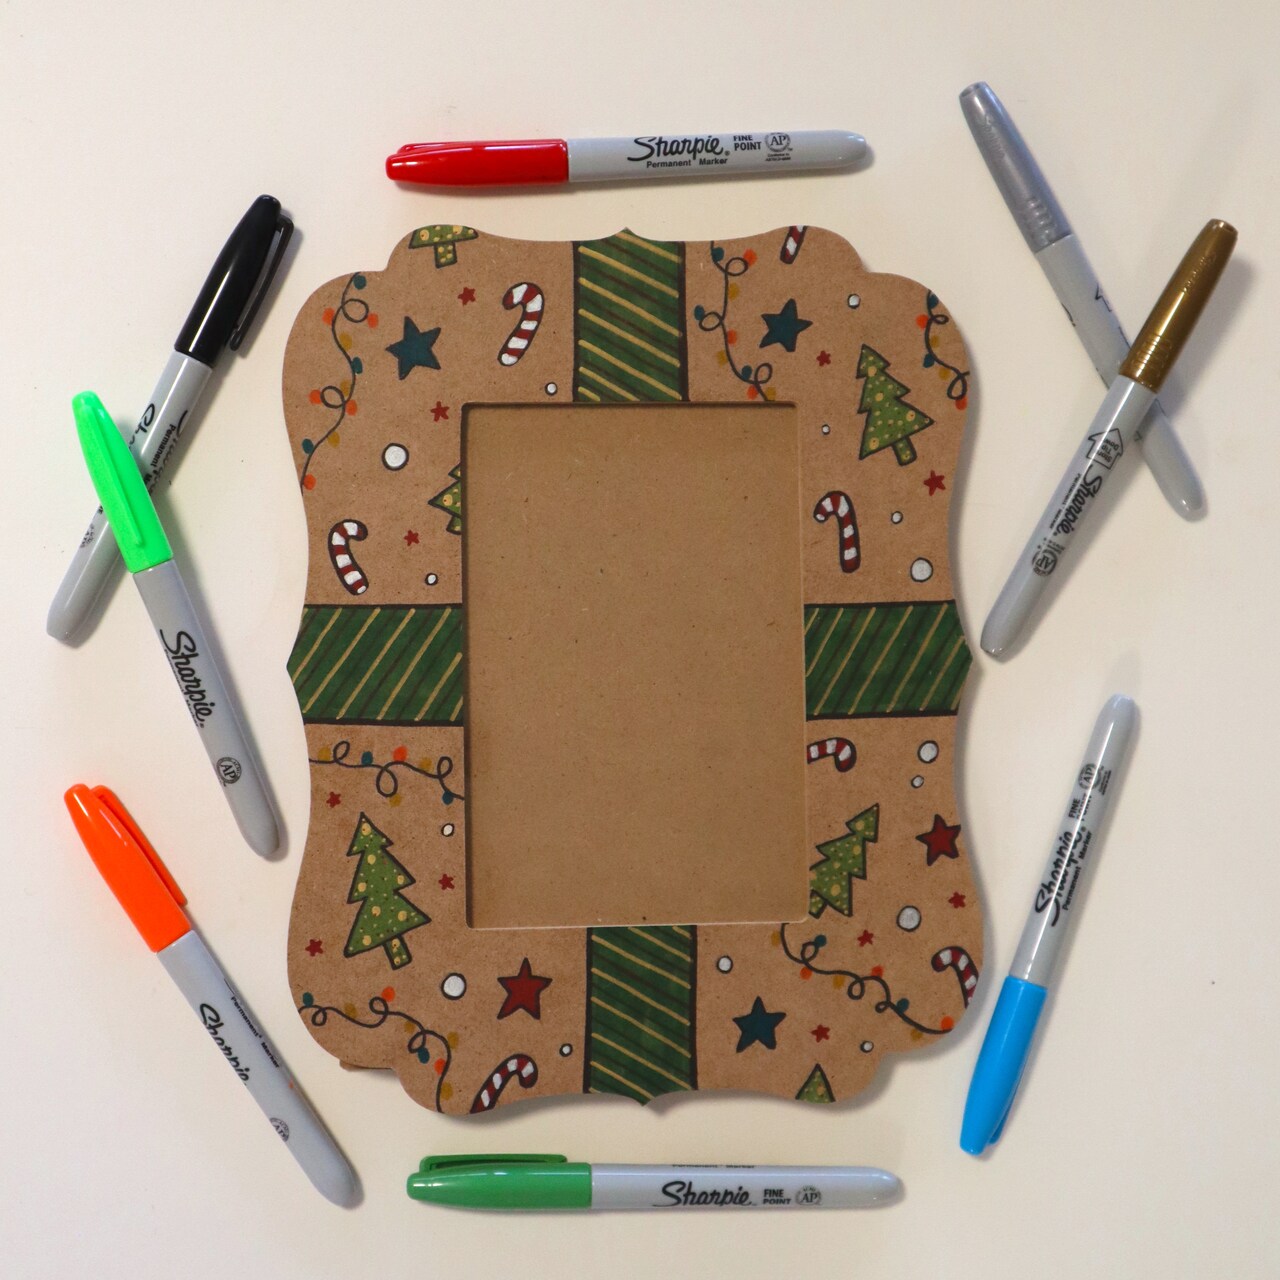 Michael's Sharpie® Holiday Class 2023: Picture Frame Art with Sharpie® Markers!